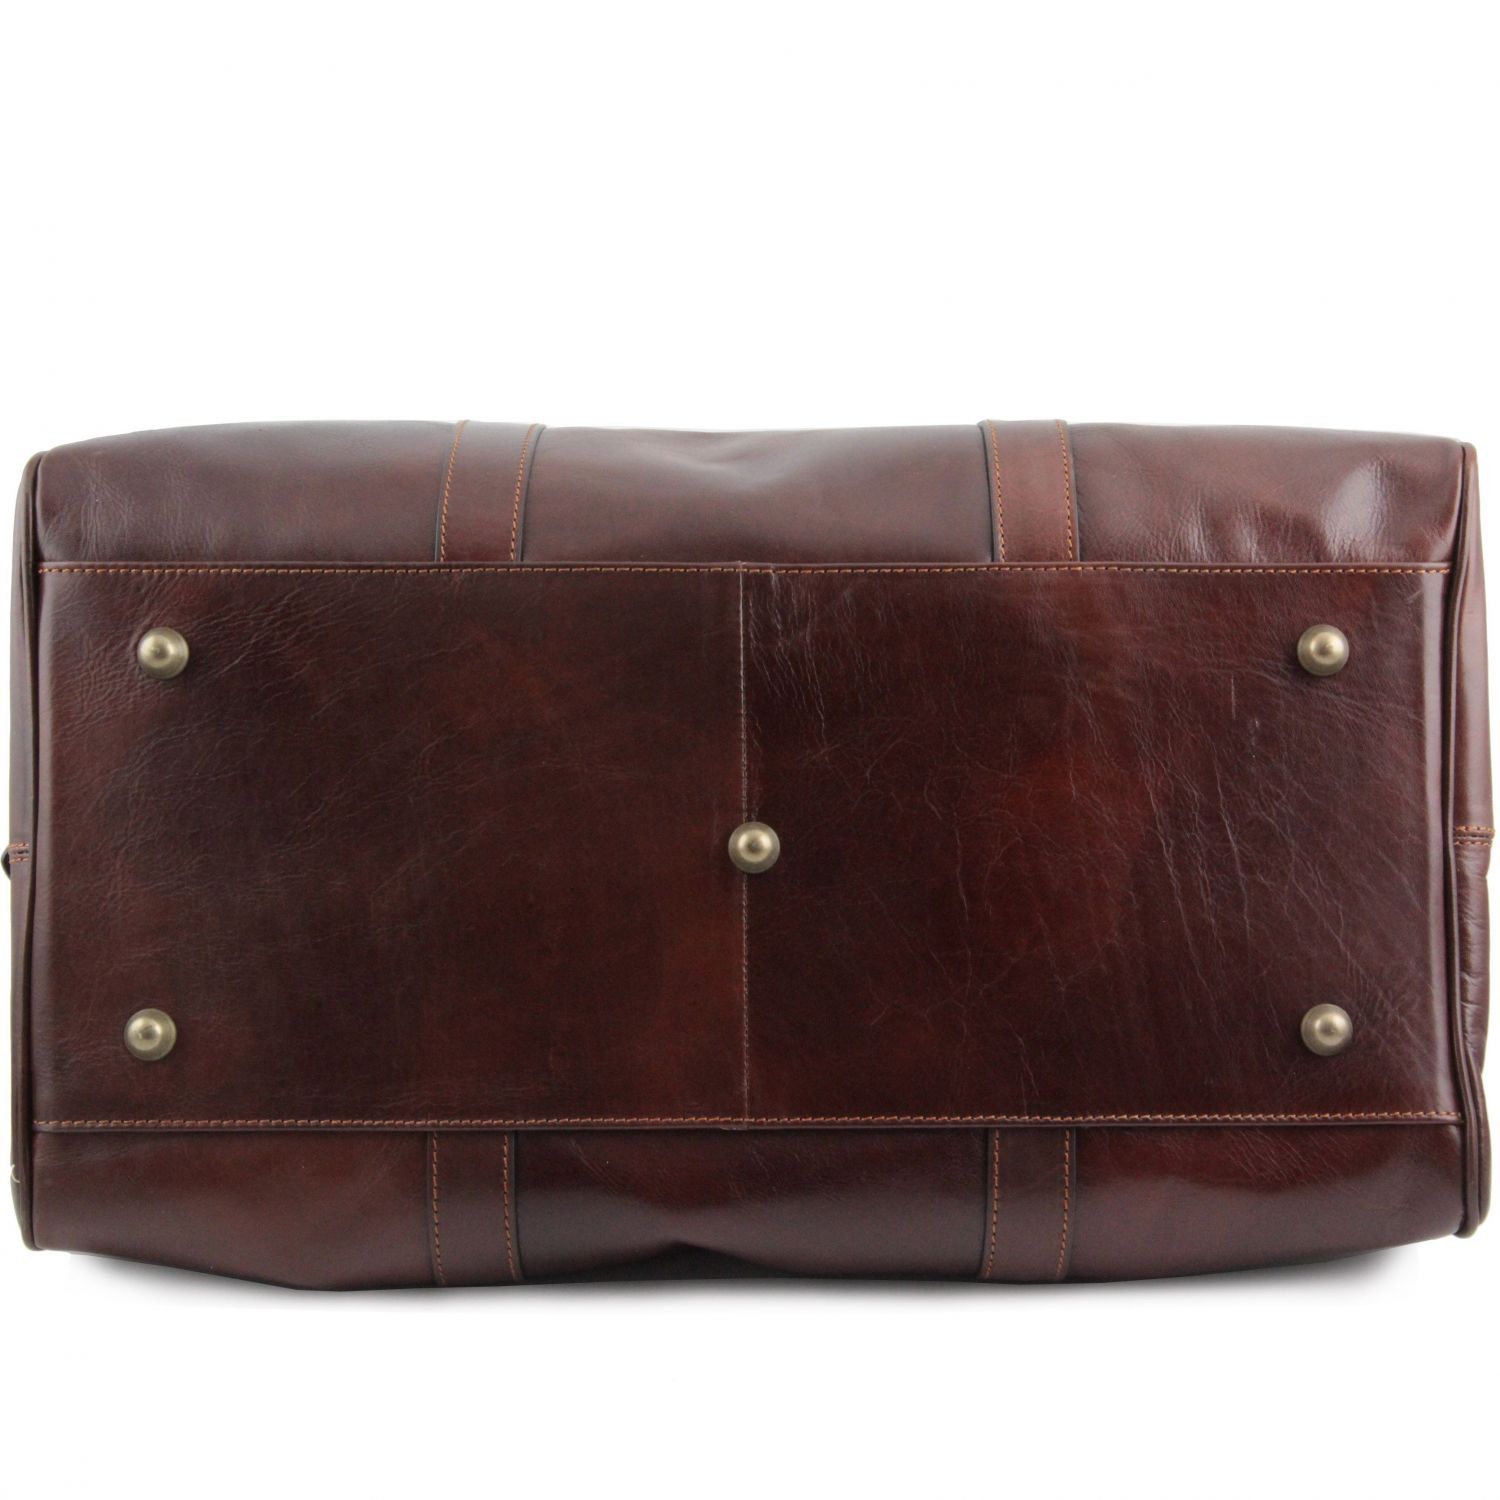 Leather Duffle Bag - Large Size - Andance - Domini Leather